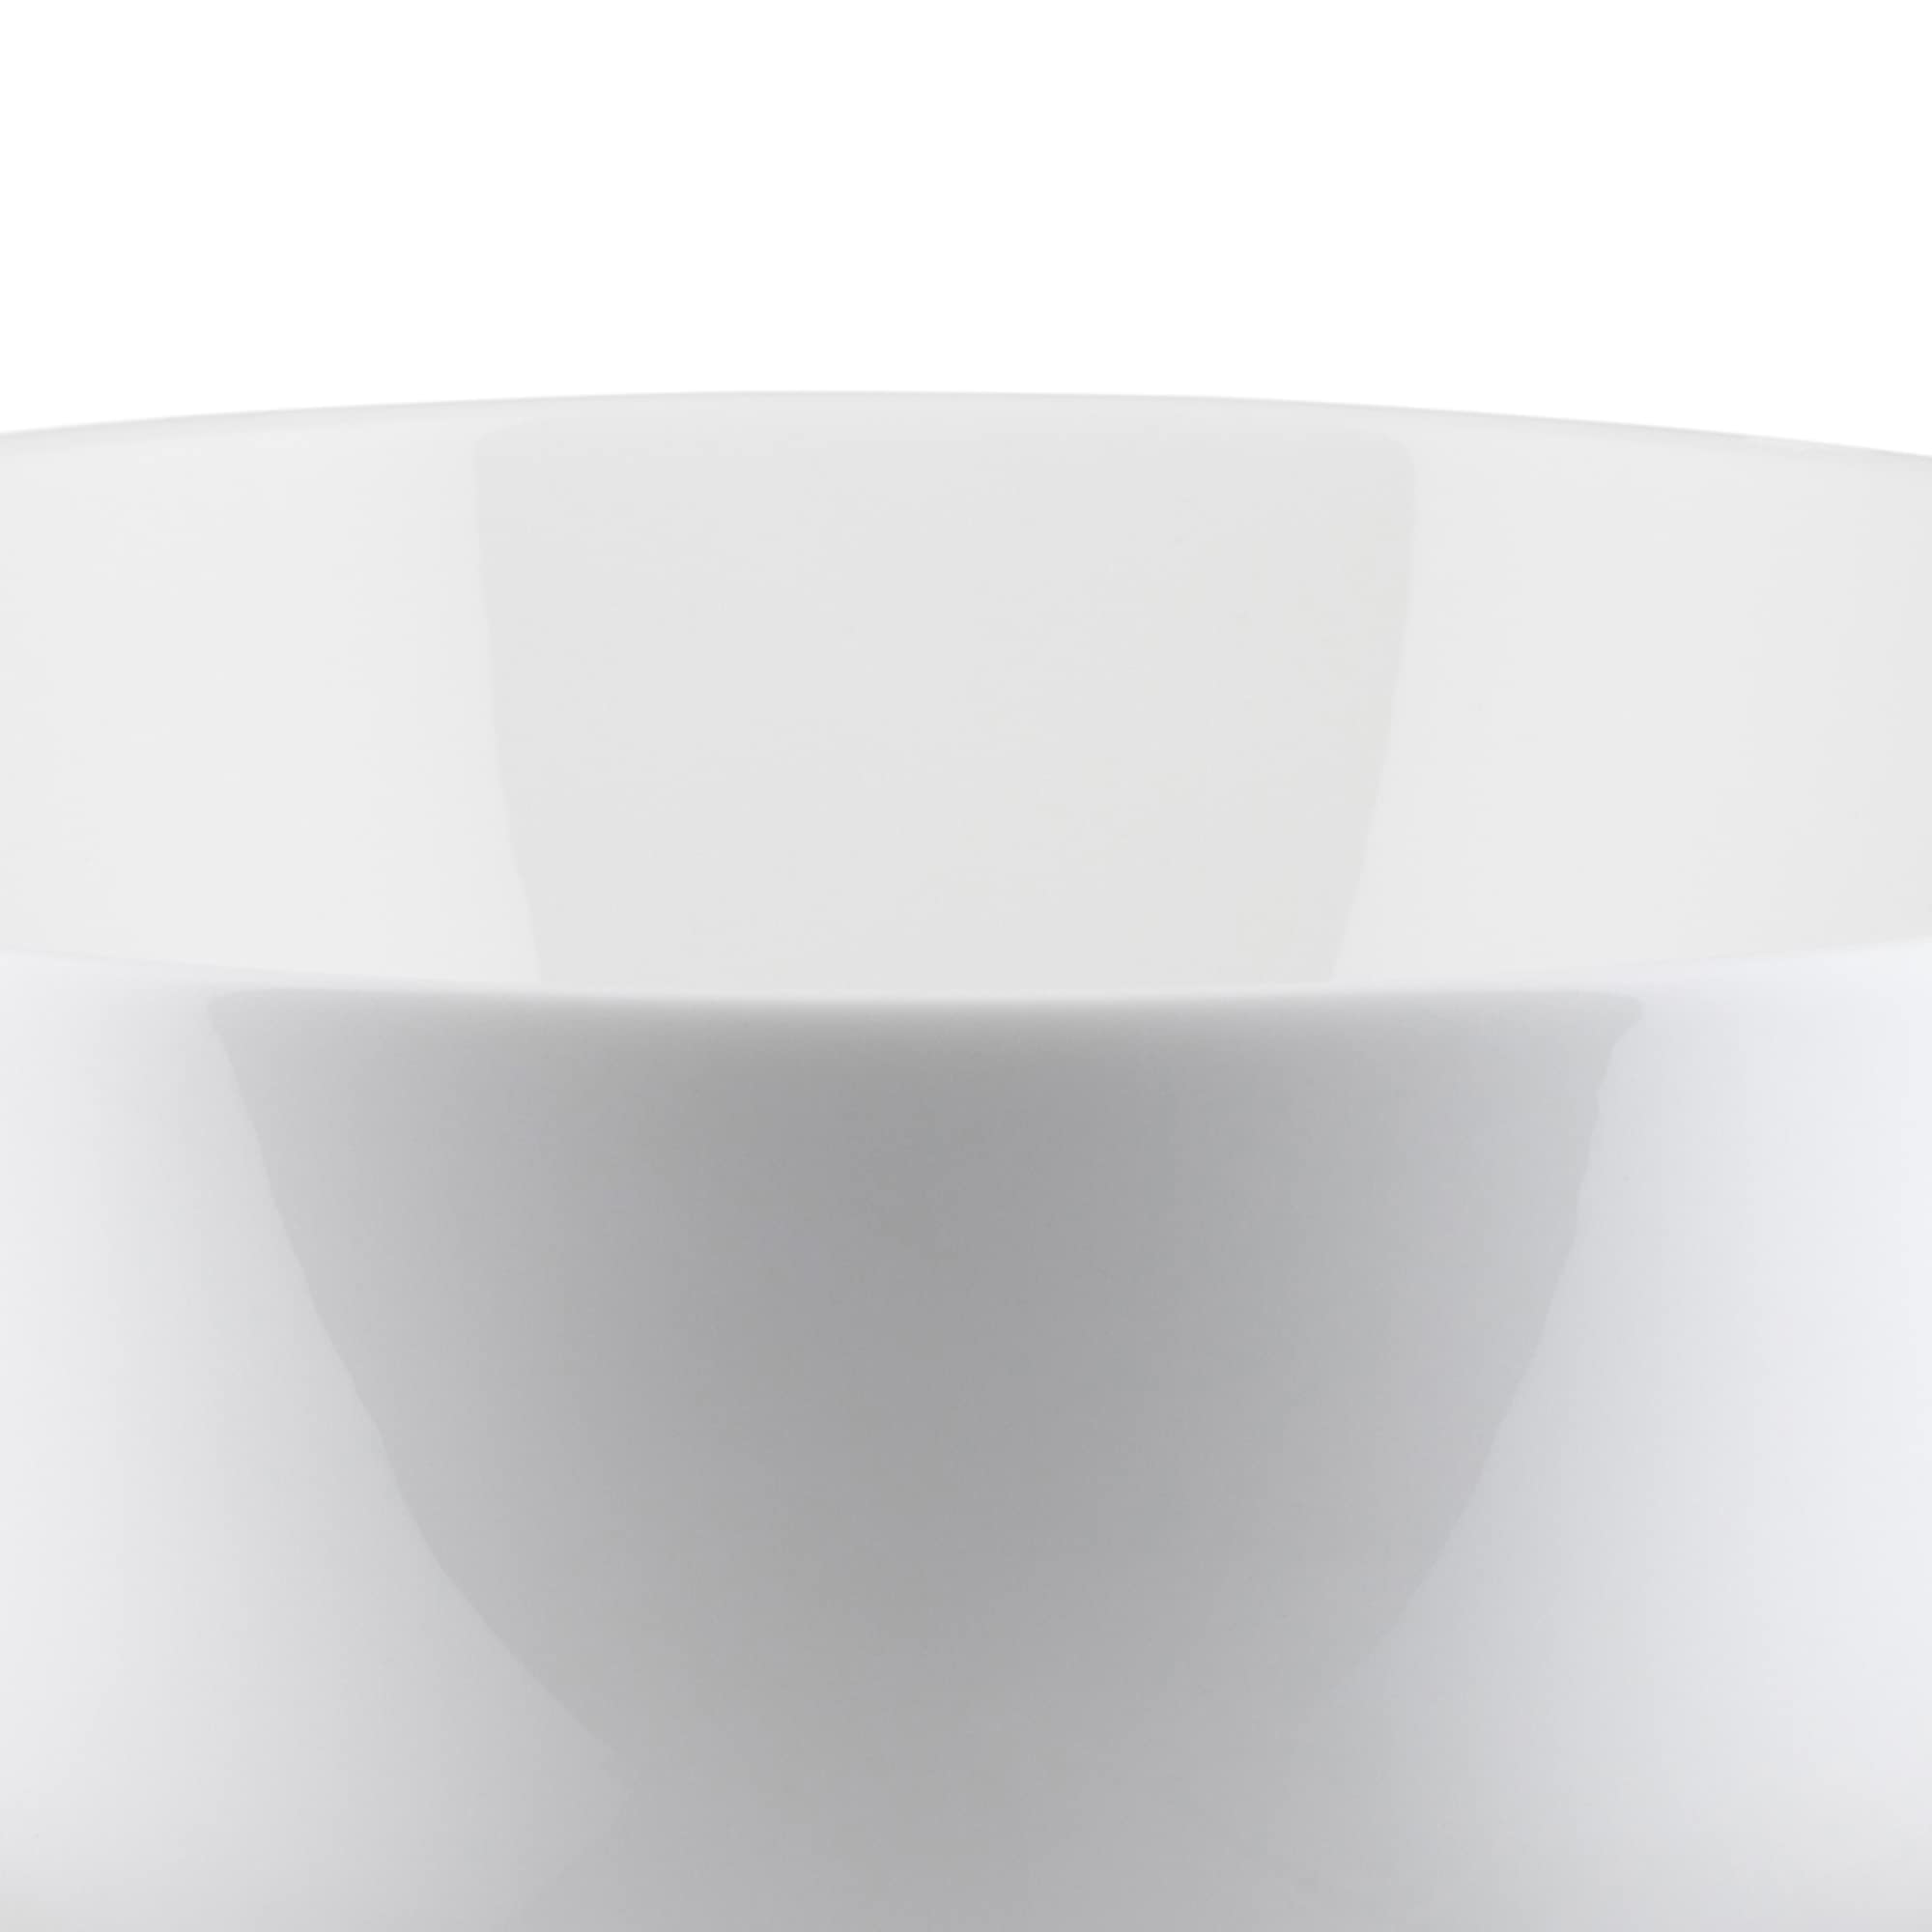 Alessi "All-Time" Salad Serving Bowl in Bone China, White, 20cm